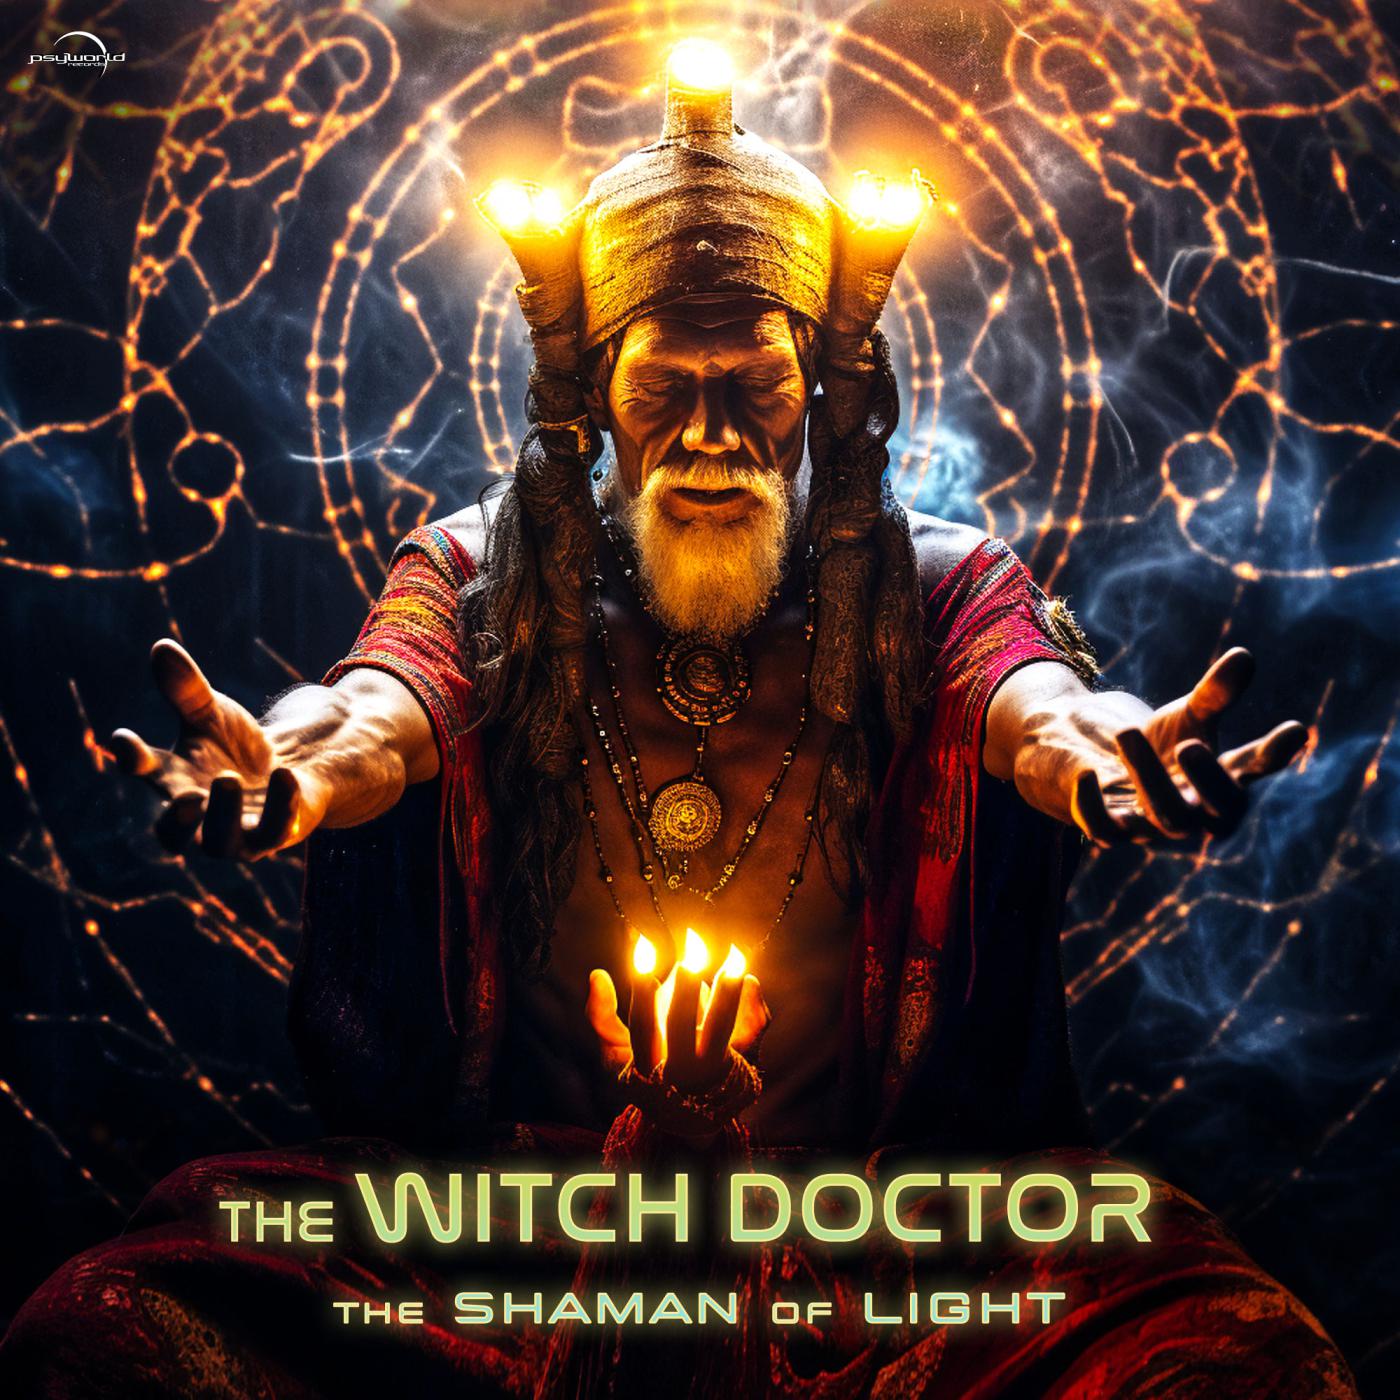 The Witch Doctor - The Shaman of Light